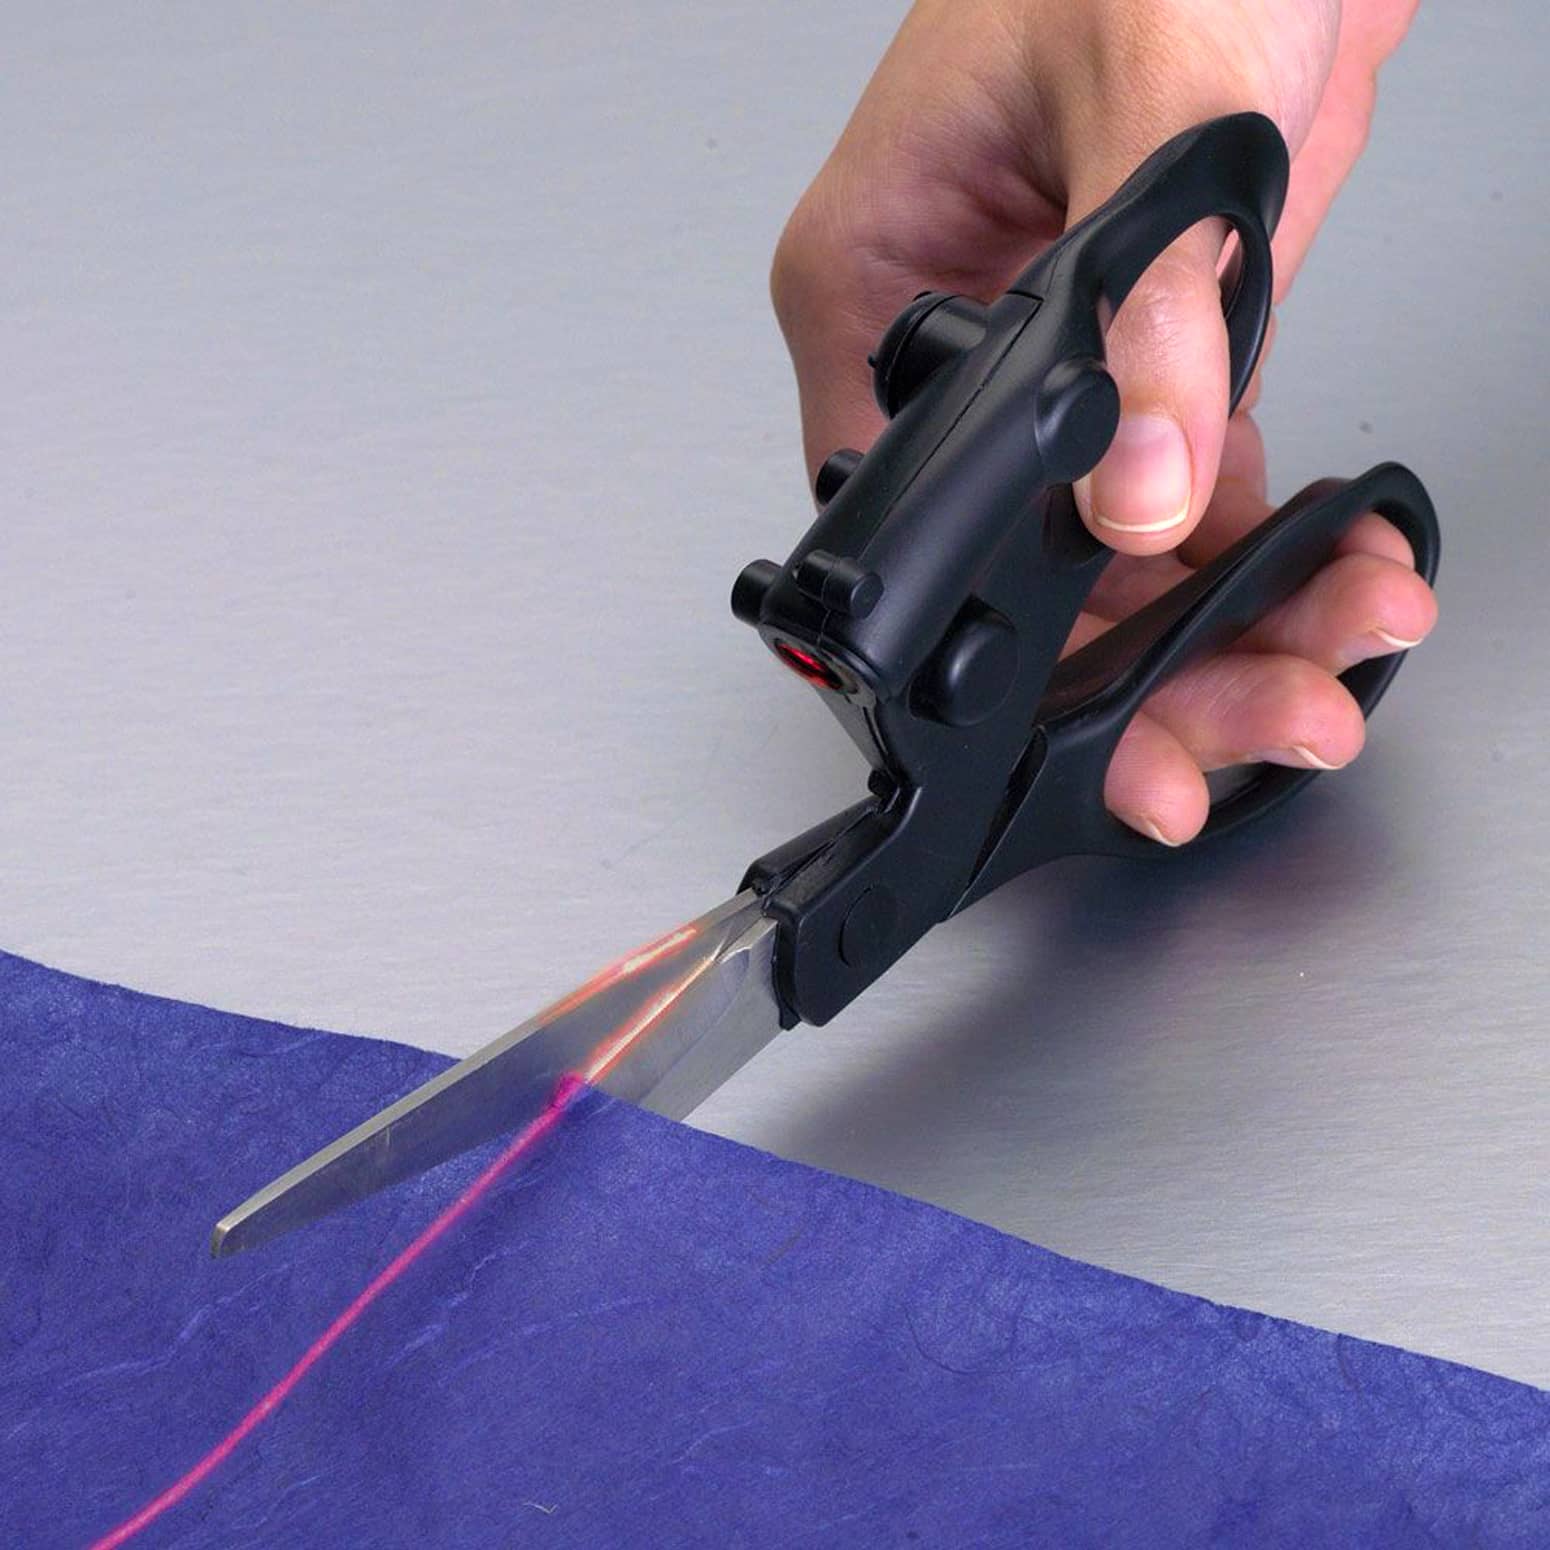 Laser Scissors - Projects a Precision Laser Beam to Cut Along